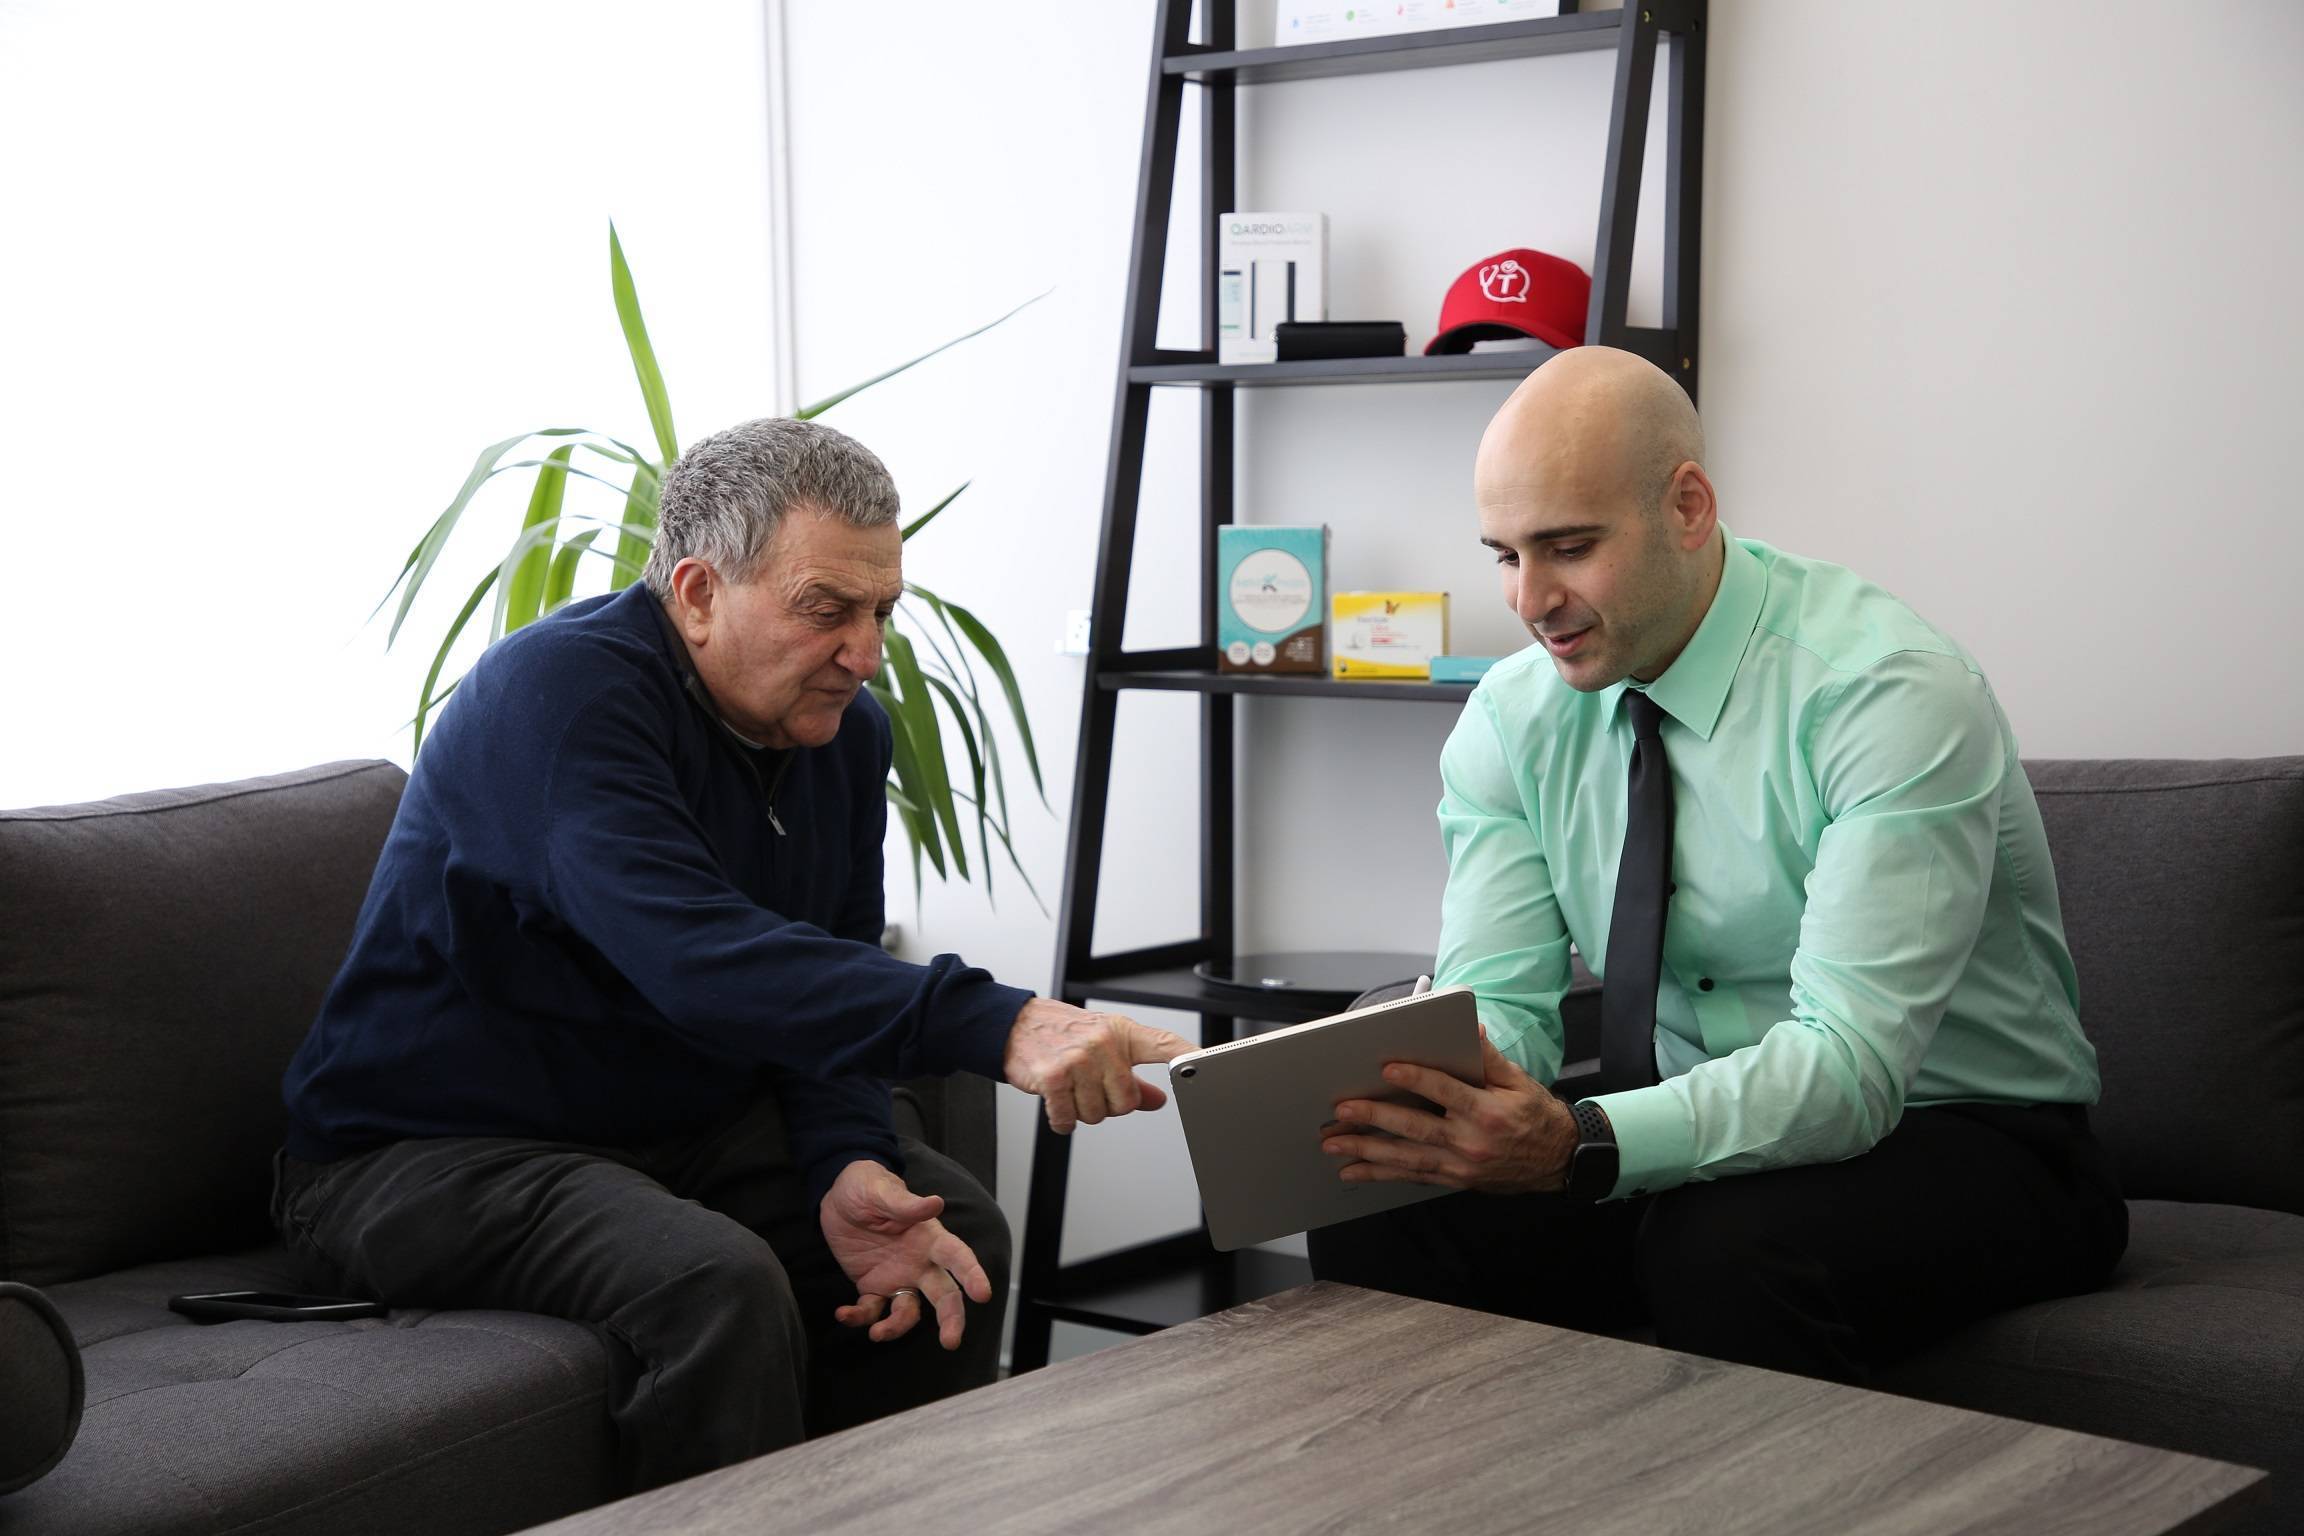 Dr. Tro Kalayjian consults with a patient in his office prior to the COVID-19 threat. Kalayjian's office is fully equipped to treat patients using remote monitoring tools, ensuring continuity of care.